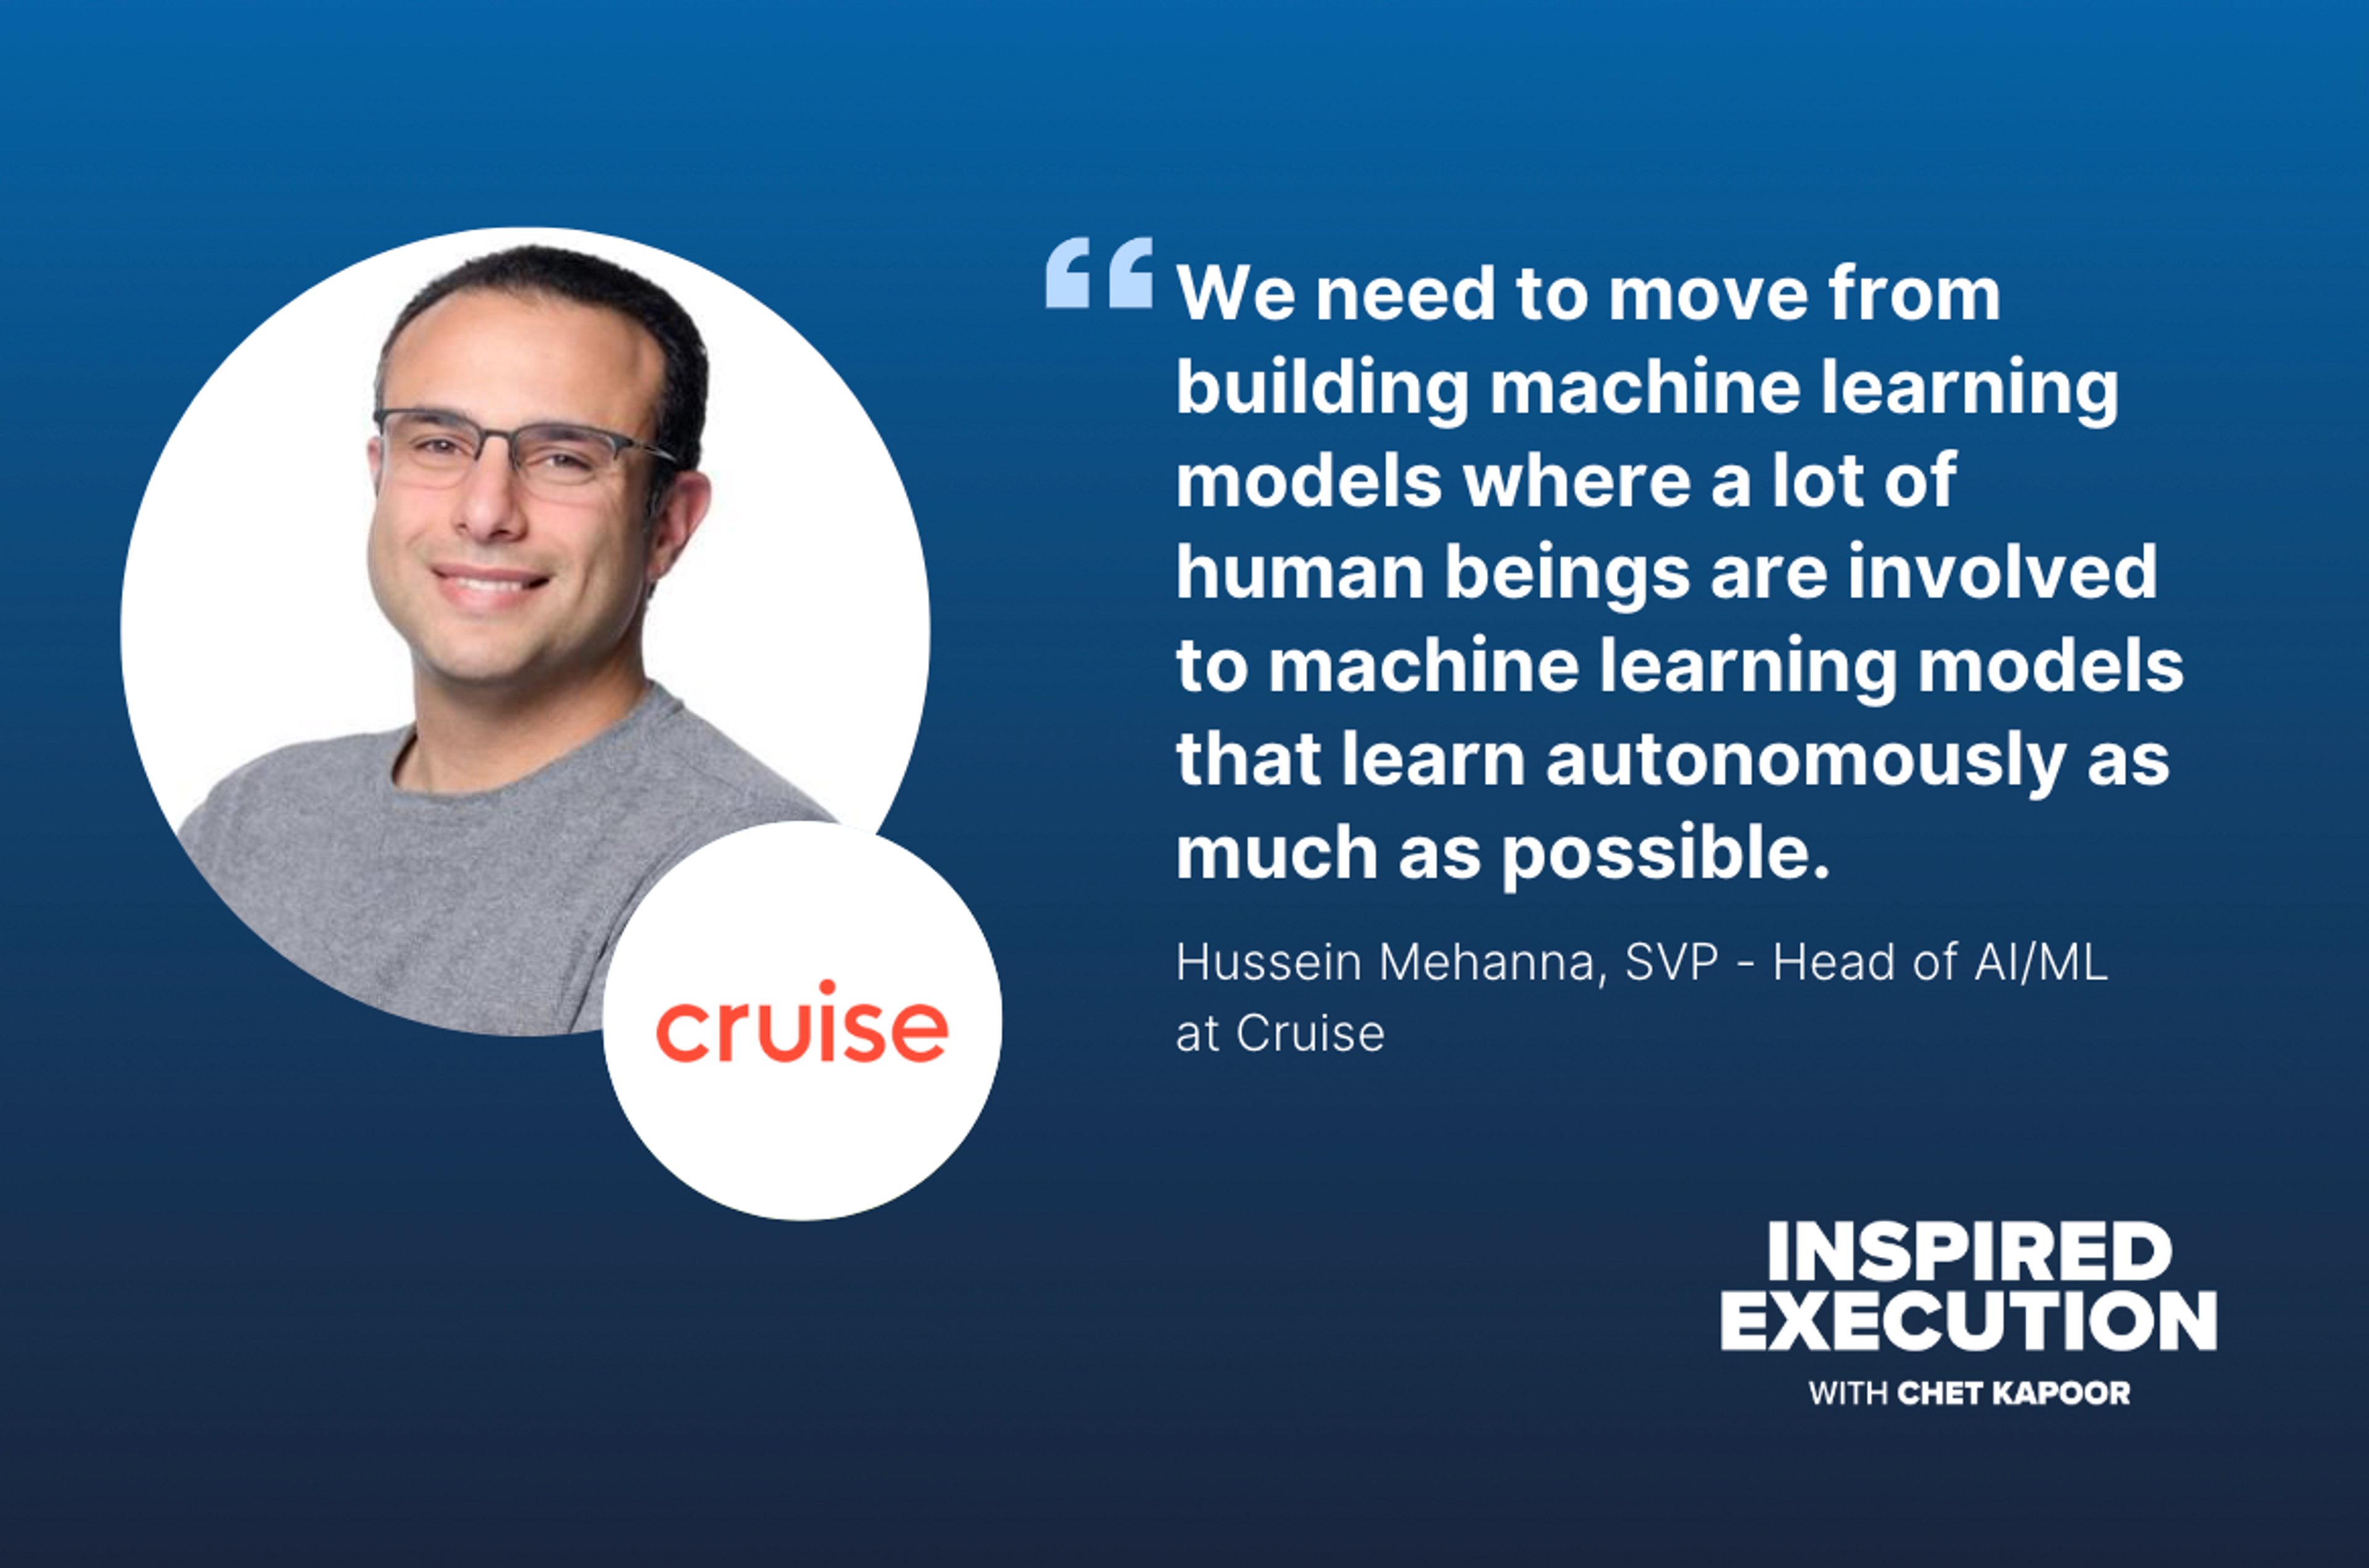 The Rise of Machines: The Not-So-Scary Future of AI and Automation with Hussein Mehanna of Cruise